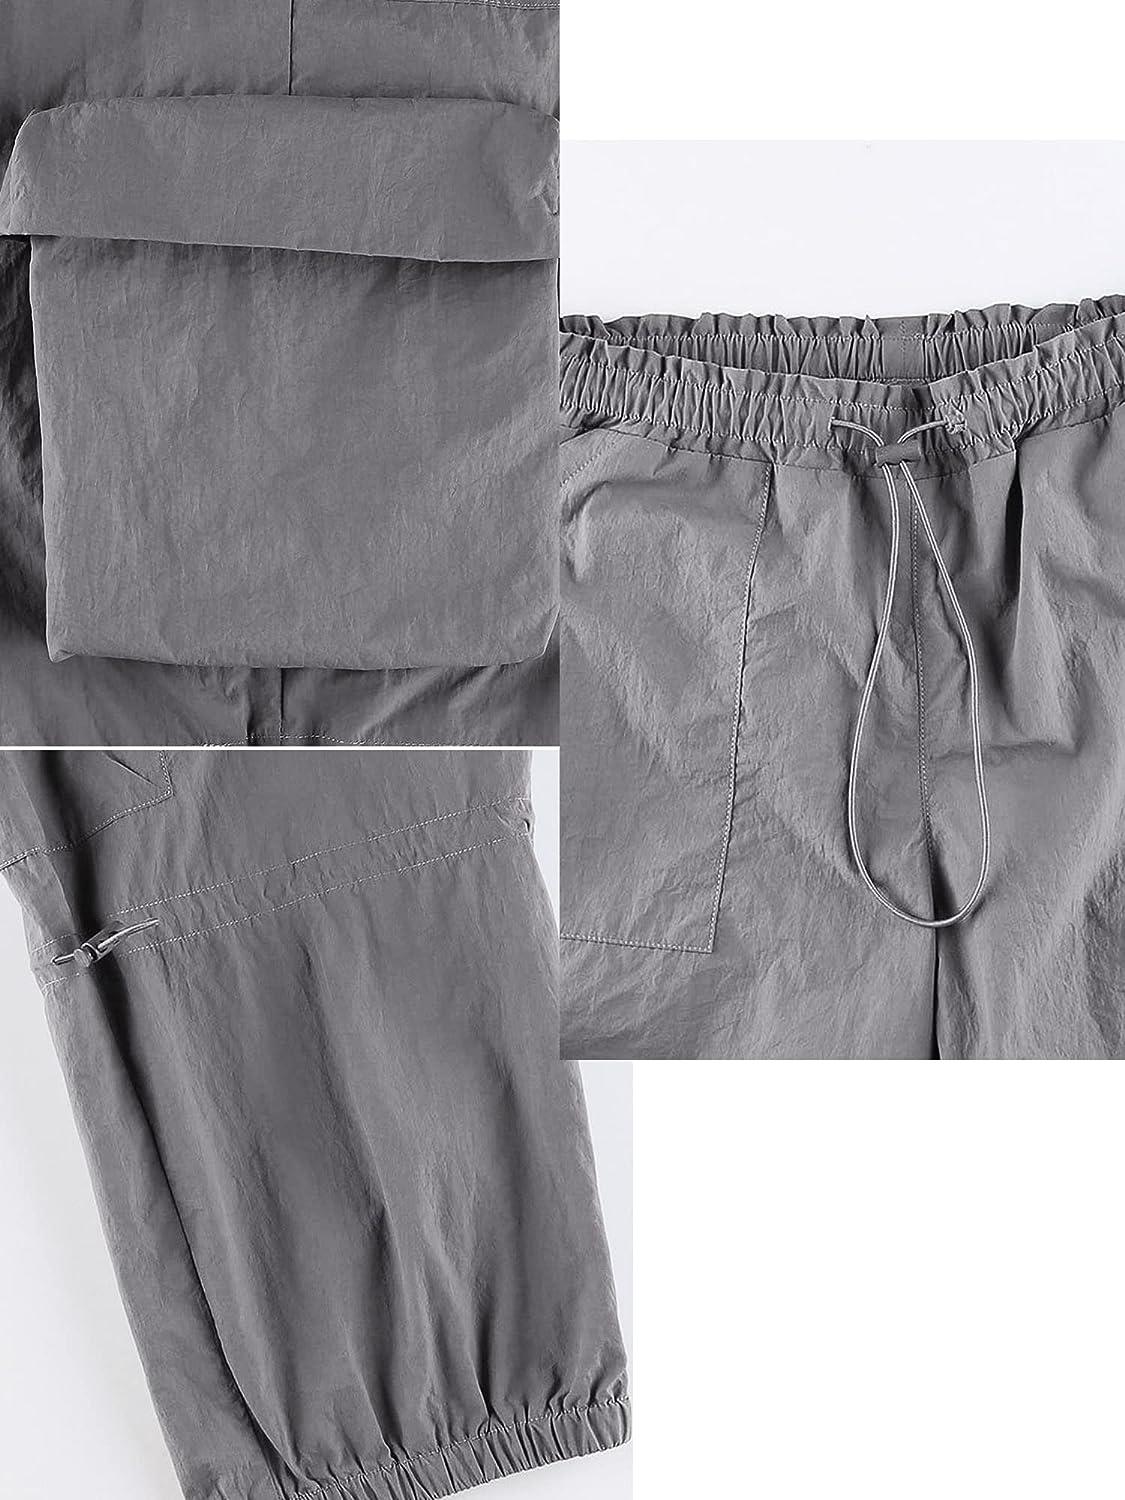 Women's Baggy Cargo Pants Drawstring Elastic Waist Ruched Hiking Pants  Parachute Pants for Women Hippie Lounge Pant A Grey Small